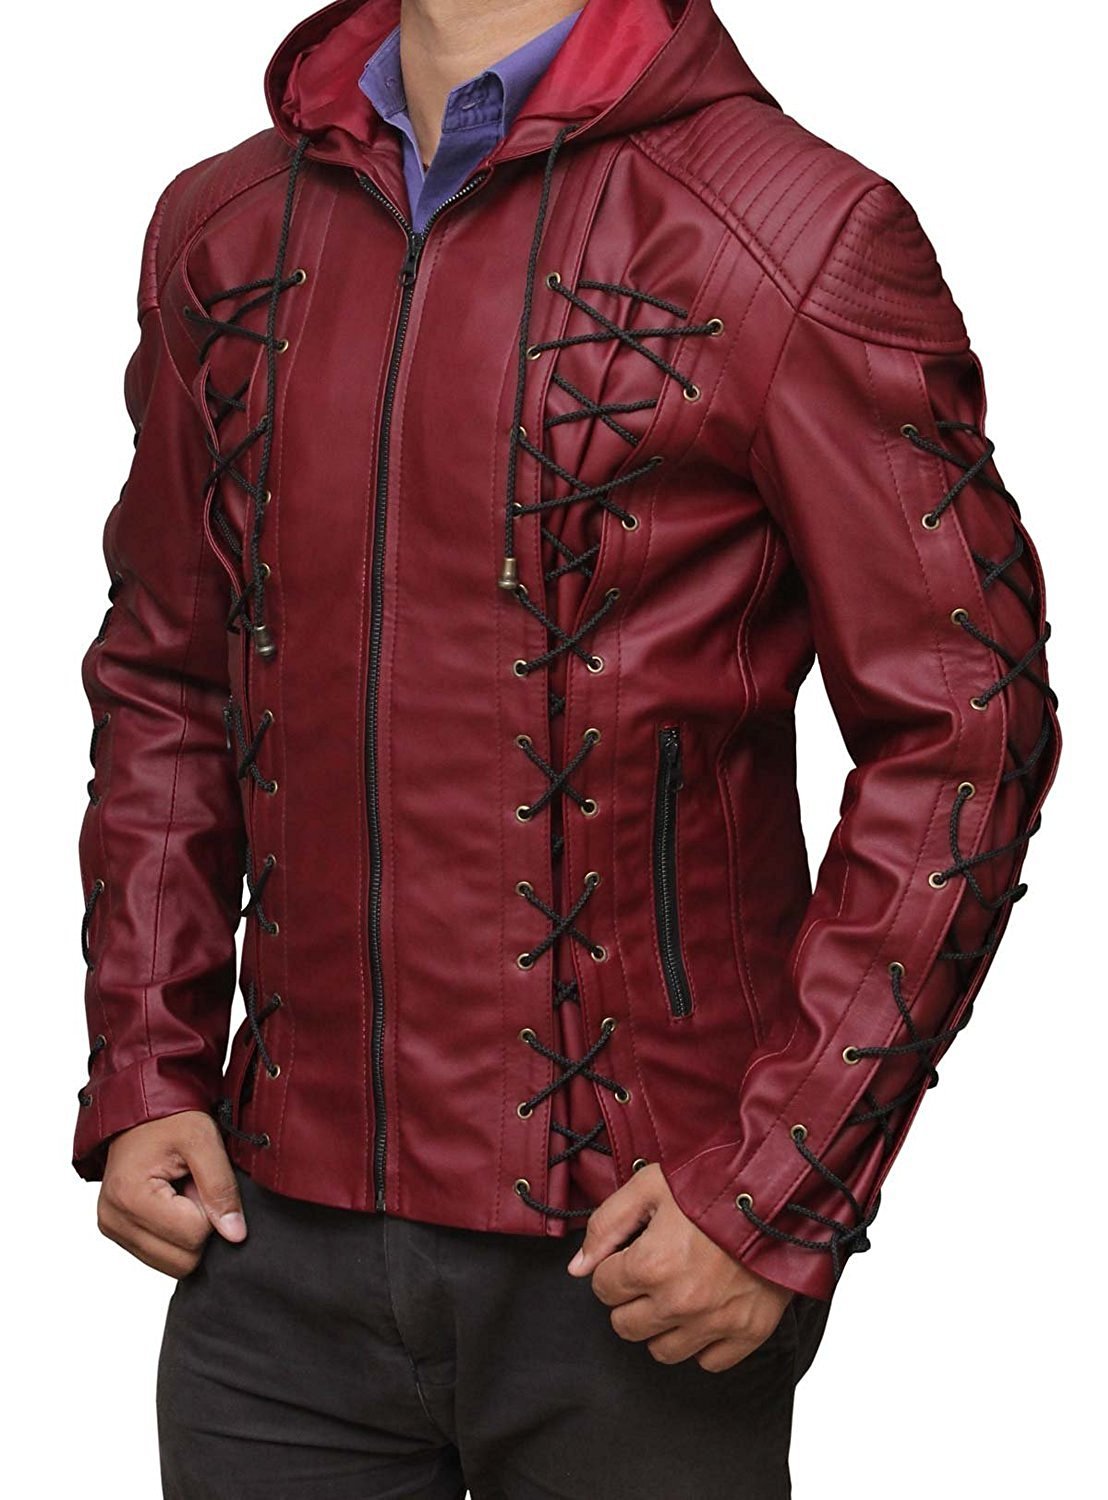 This Amazing Roy Harper Red Arrow Jacket is now... - James Bond Suits